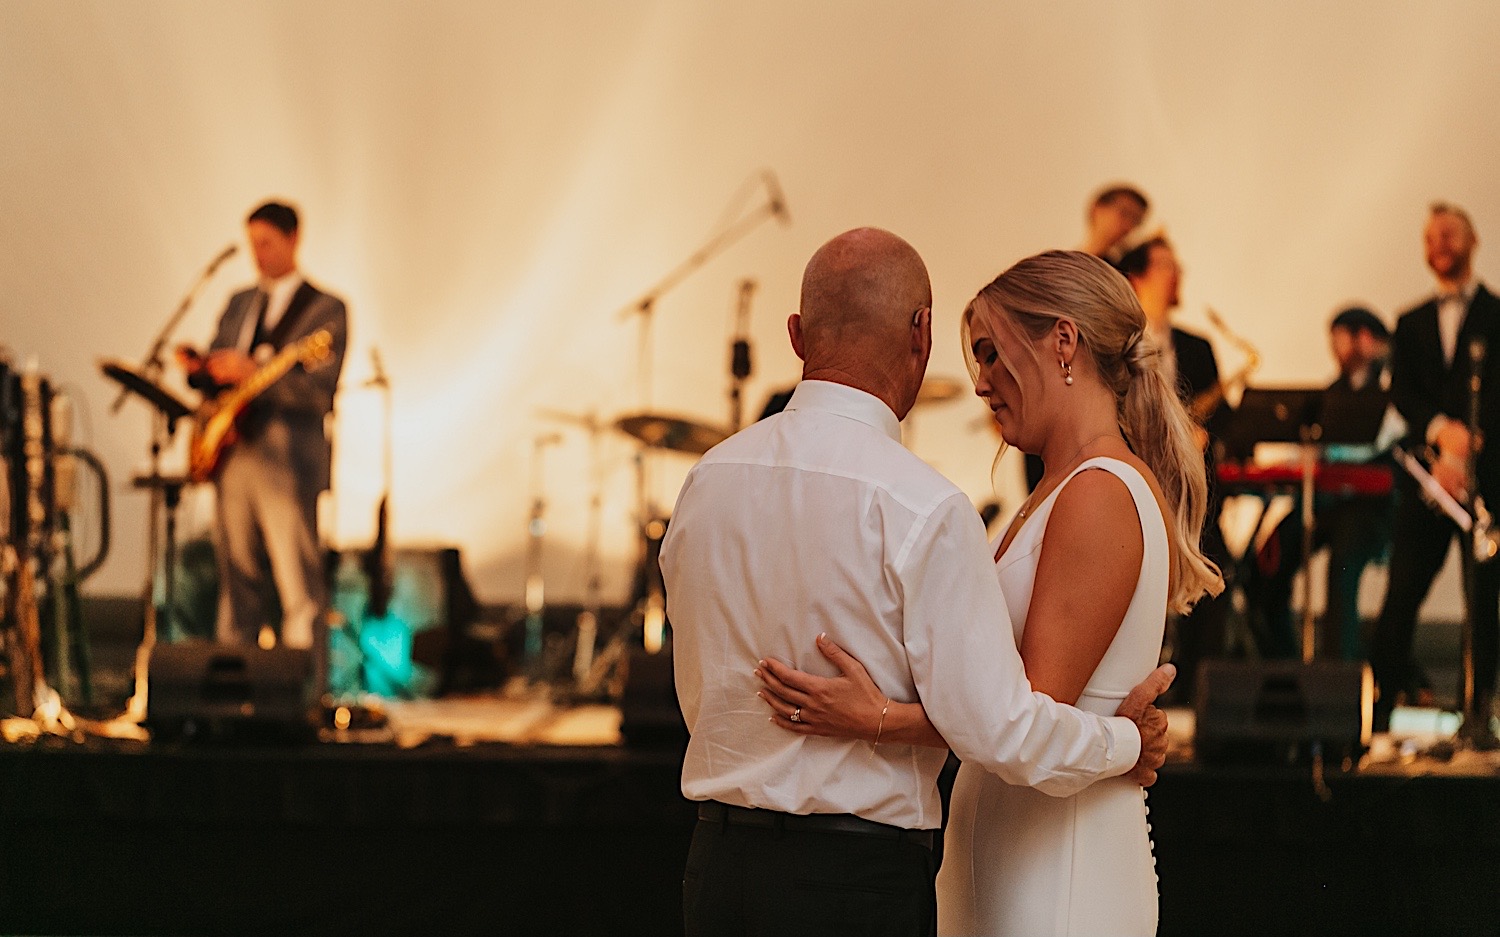 A bride dances with her father during her wedding reception at the La Crosse Center while the live band plays behind them